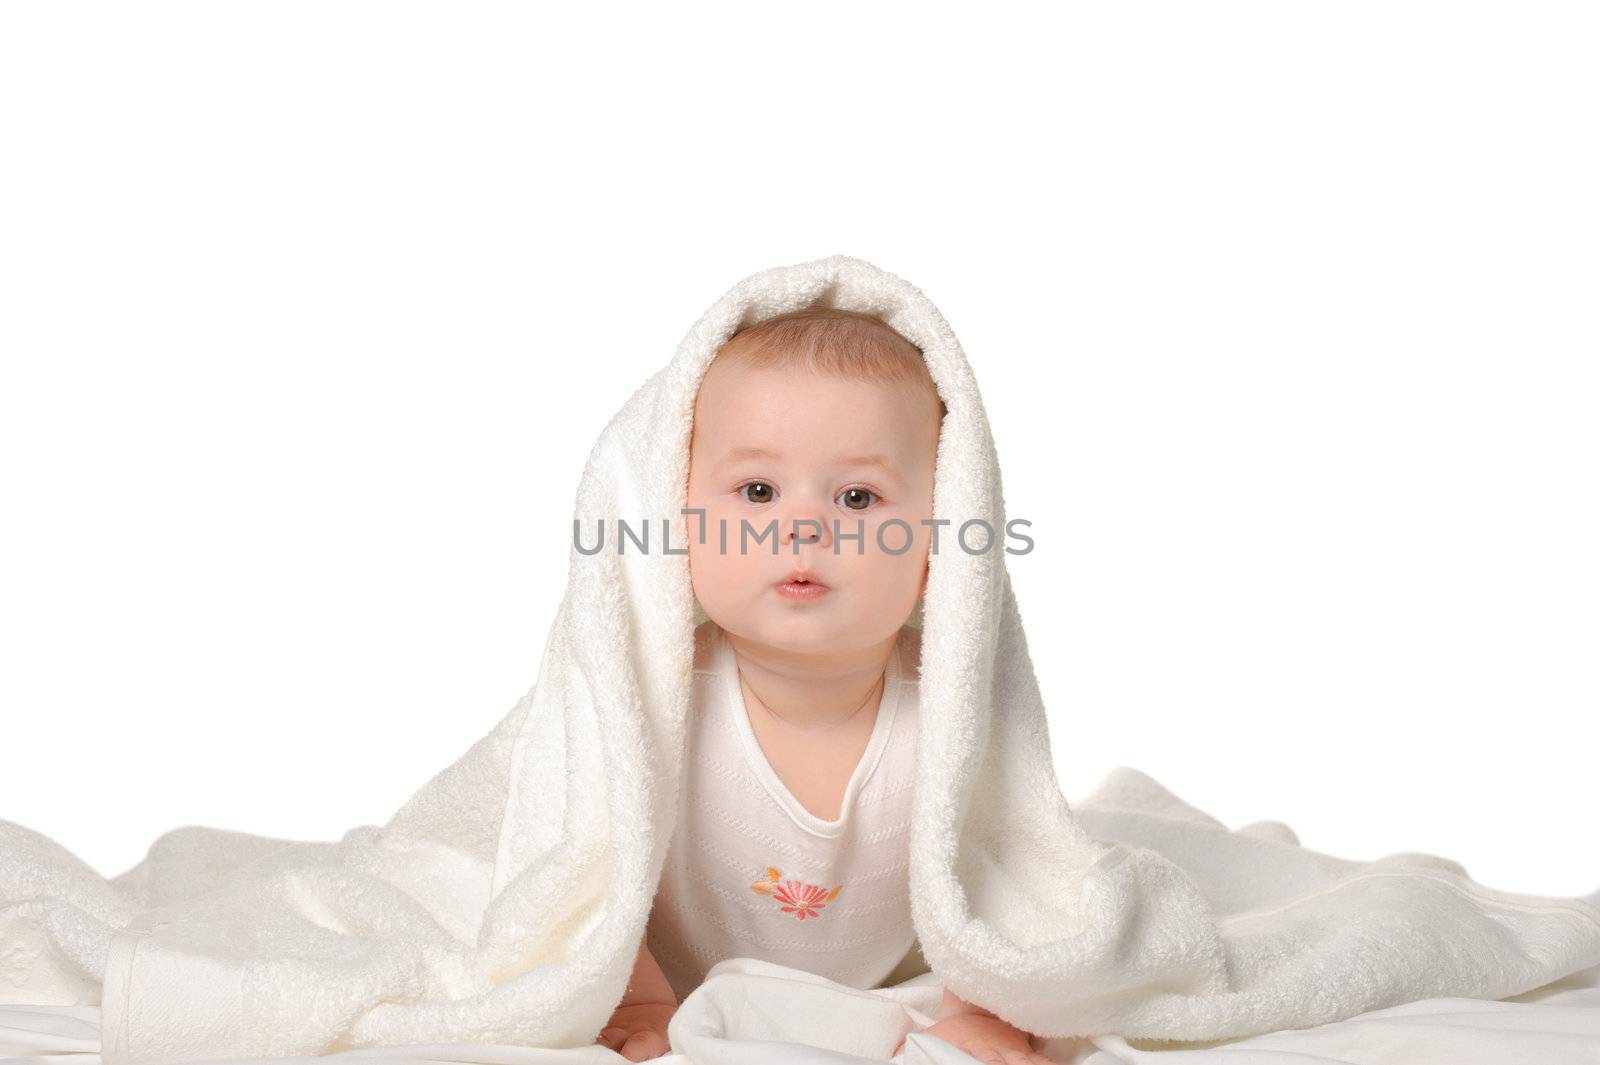 The baby under a towel. Age of 8 months. It is isolated on a whi by galdzer